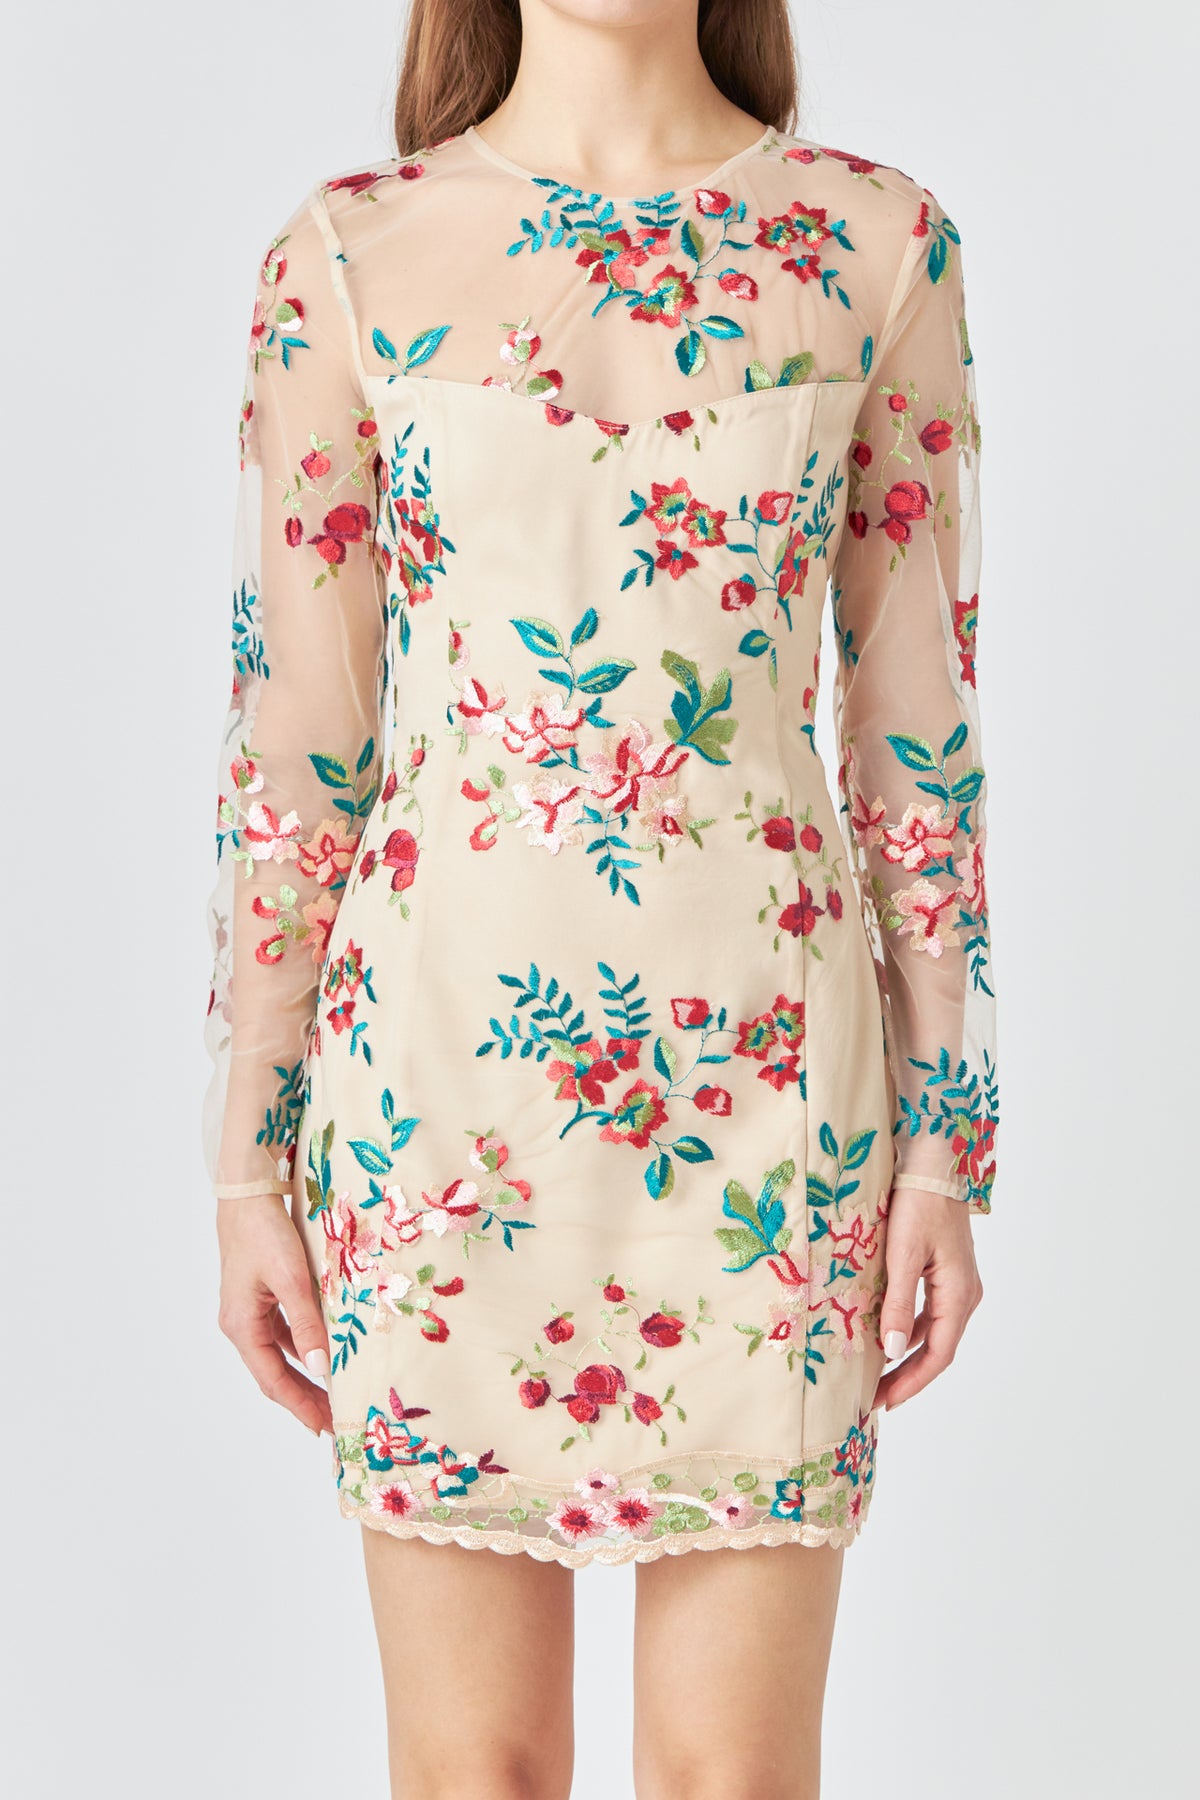 ENDLESS ROSE - Floral Embroidered Dress - DRESSES available at Objectrare